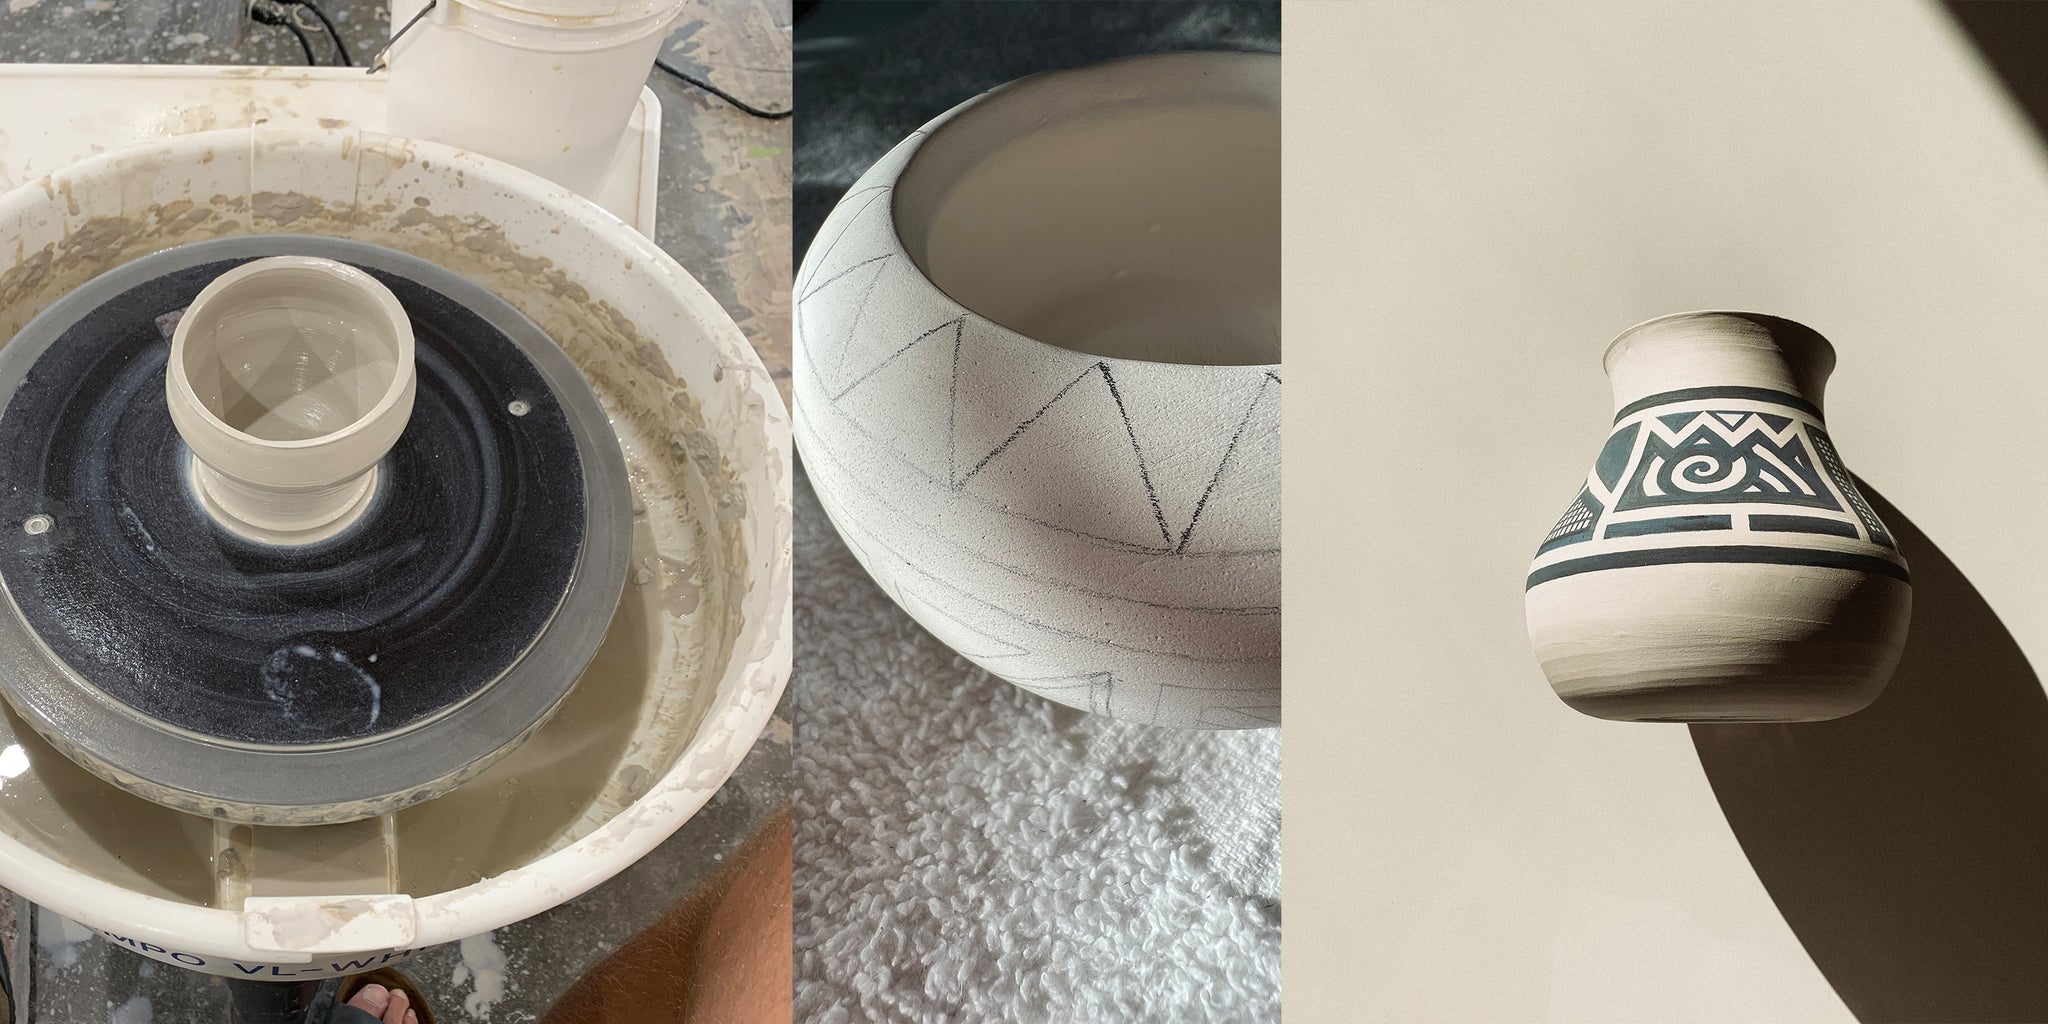  Triptych of Images. Left Image: A first person perspective view of a bowl being made on a pottery wheel. Middle Image: A close up of a ceramic bowl that is unglazed, but has an outline sketch of a geometric pattern on it. Right Image: A ceramic vase bathed in sunshine, the art piece is unglazed but has a strong black geometric painted on it. Art work by Devin Agar. 